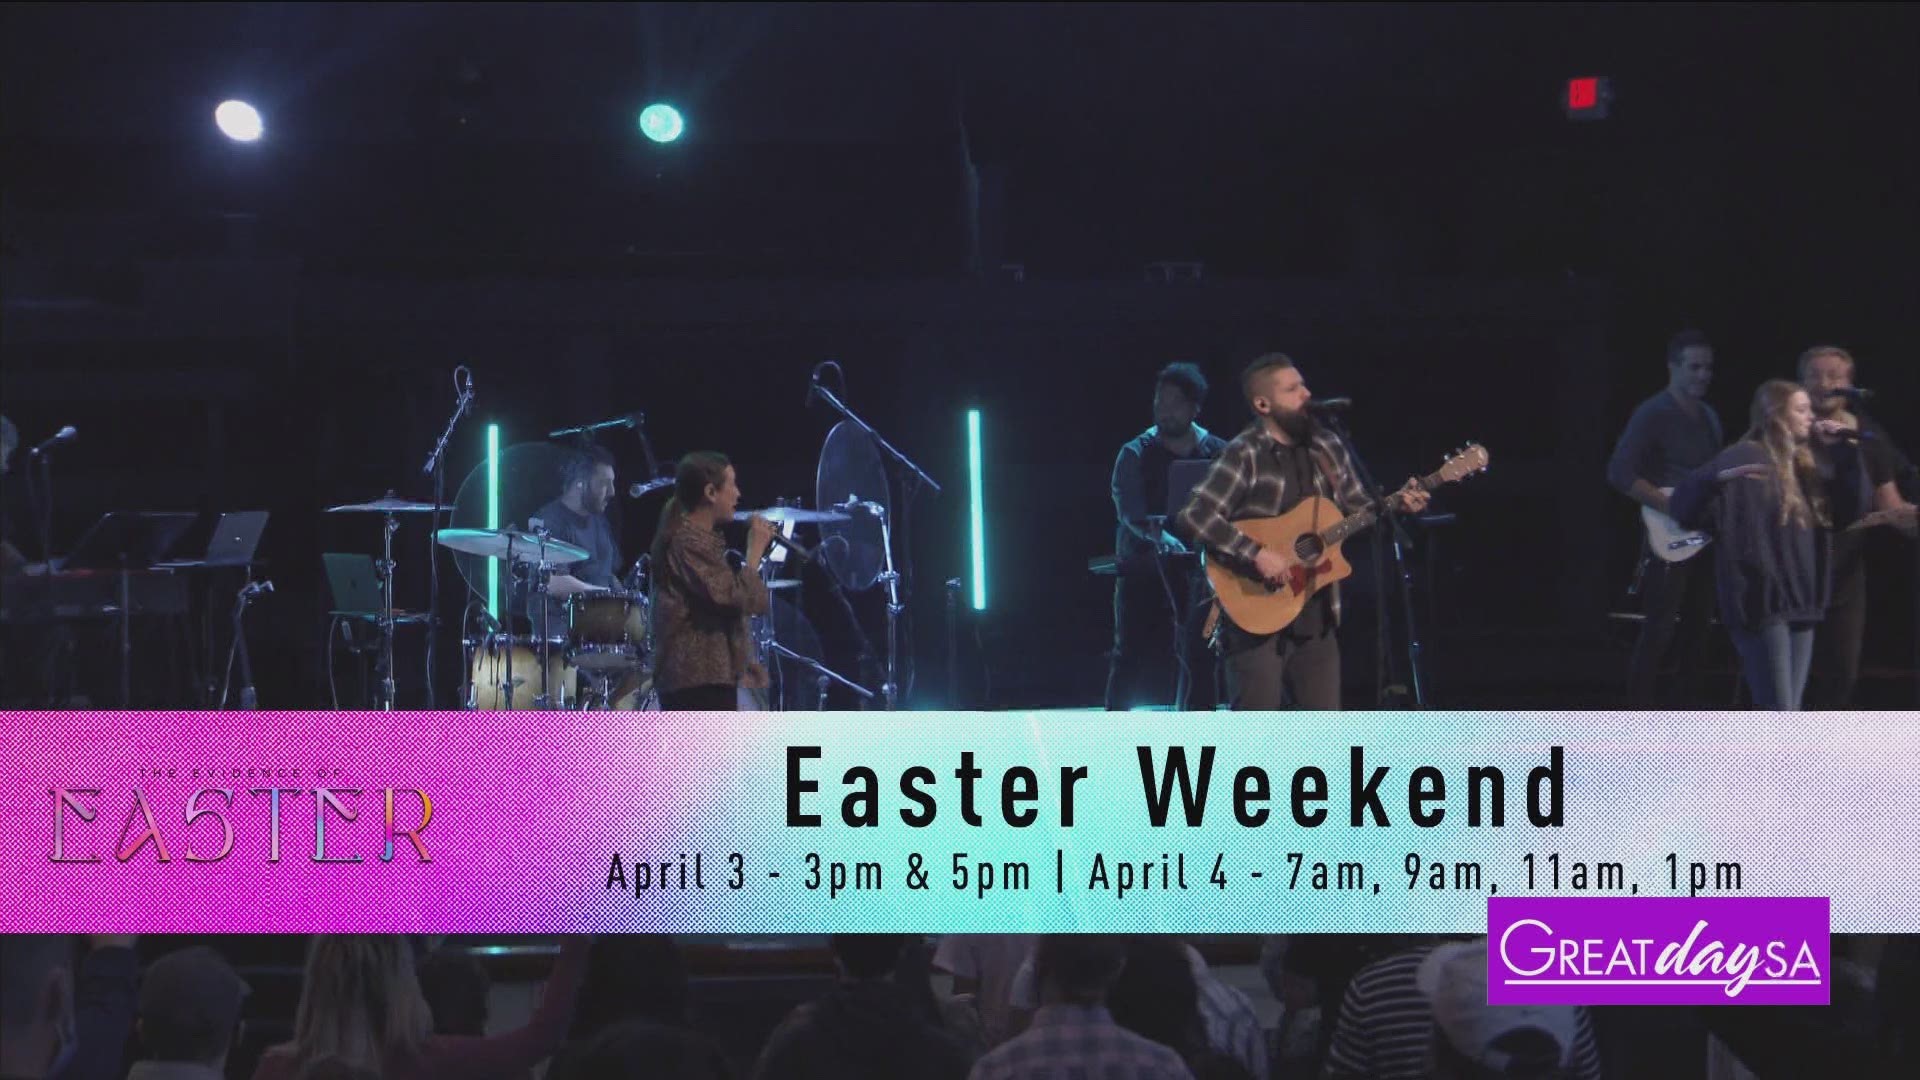 This year, Community Bible Church is opening its doors for its Easter Services after going completely virtual in 2020.